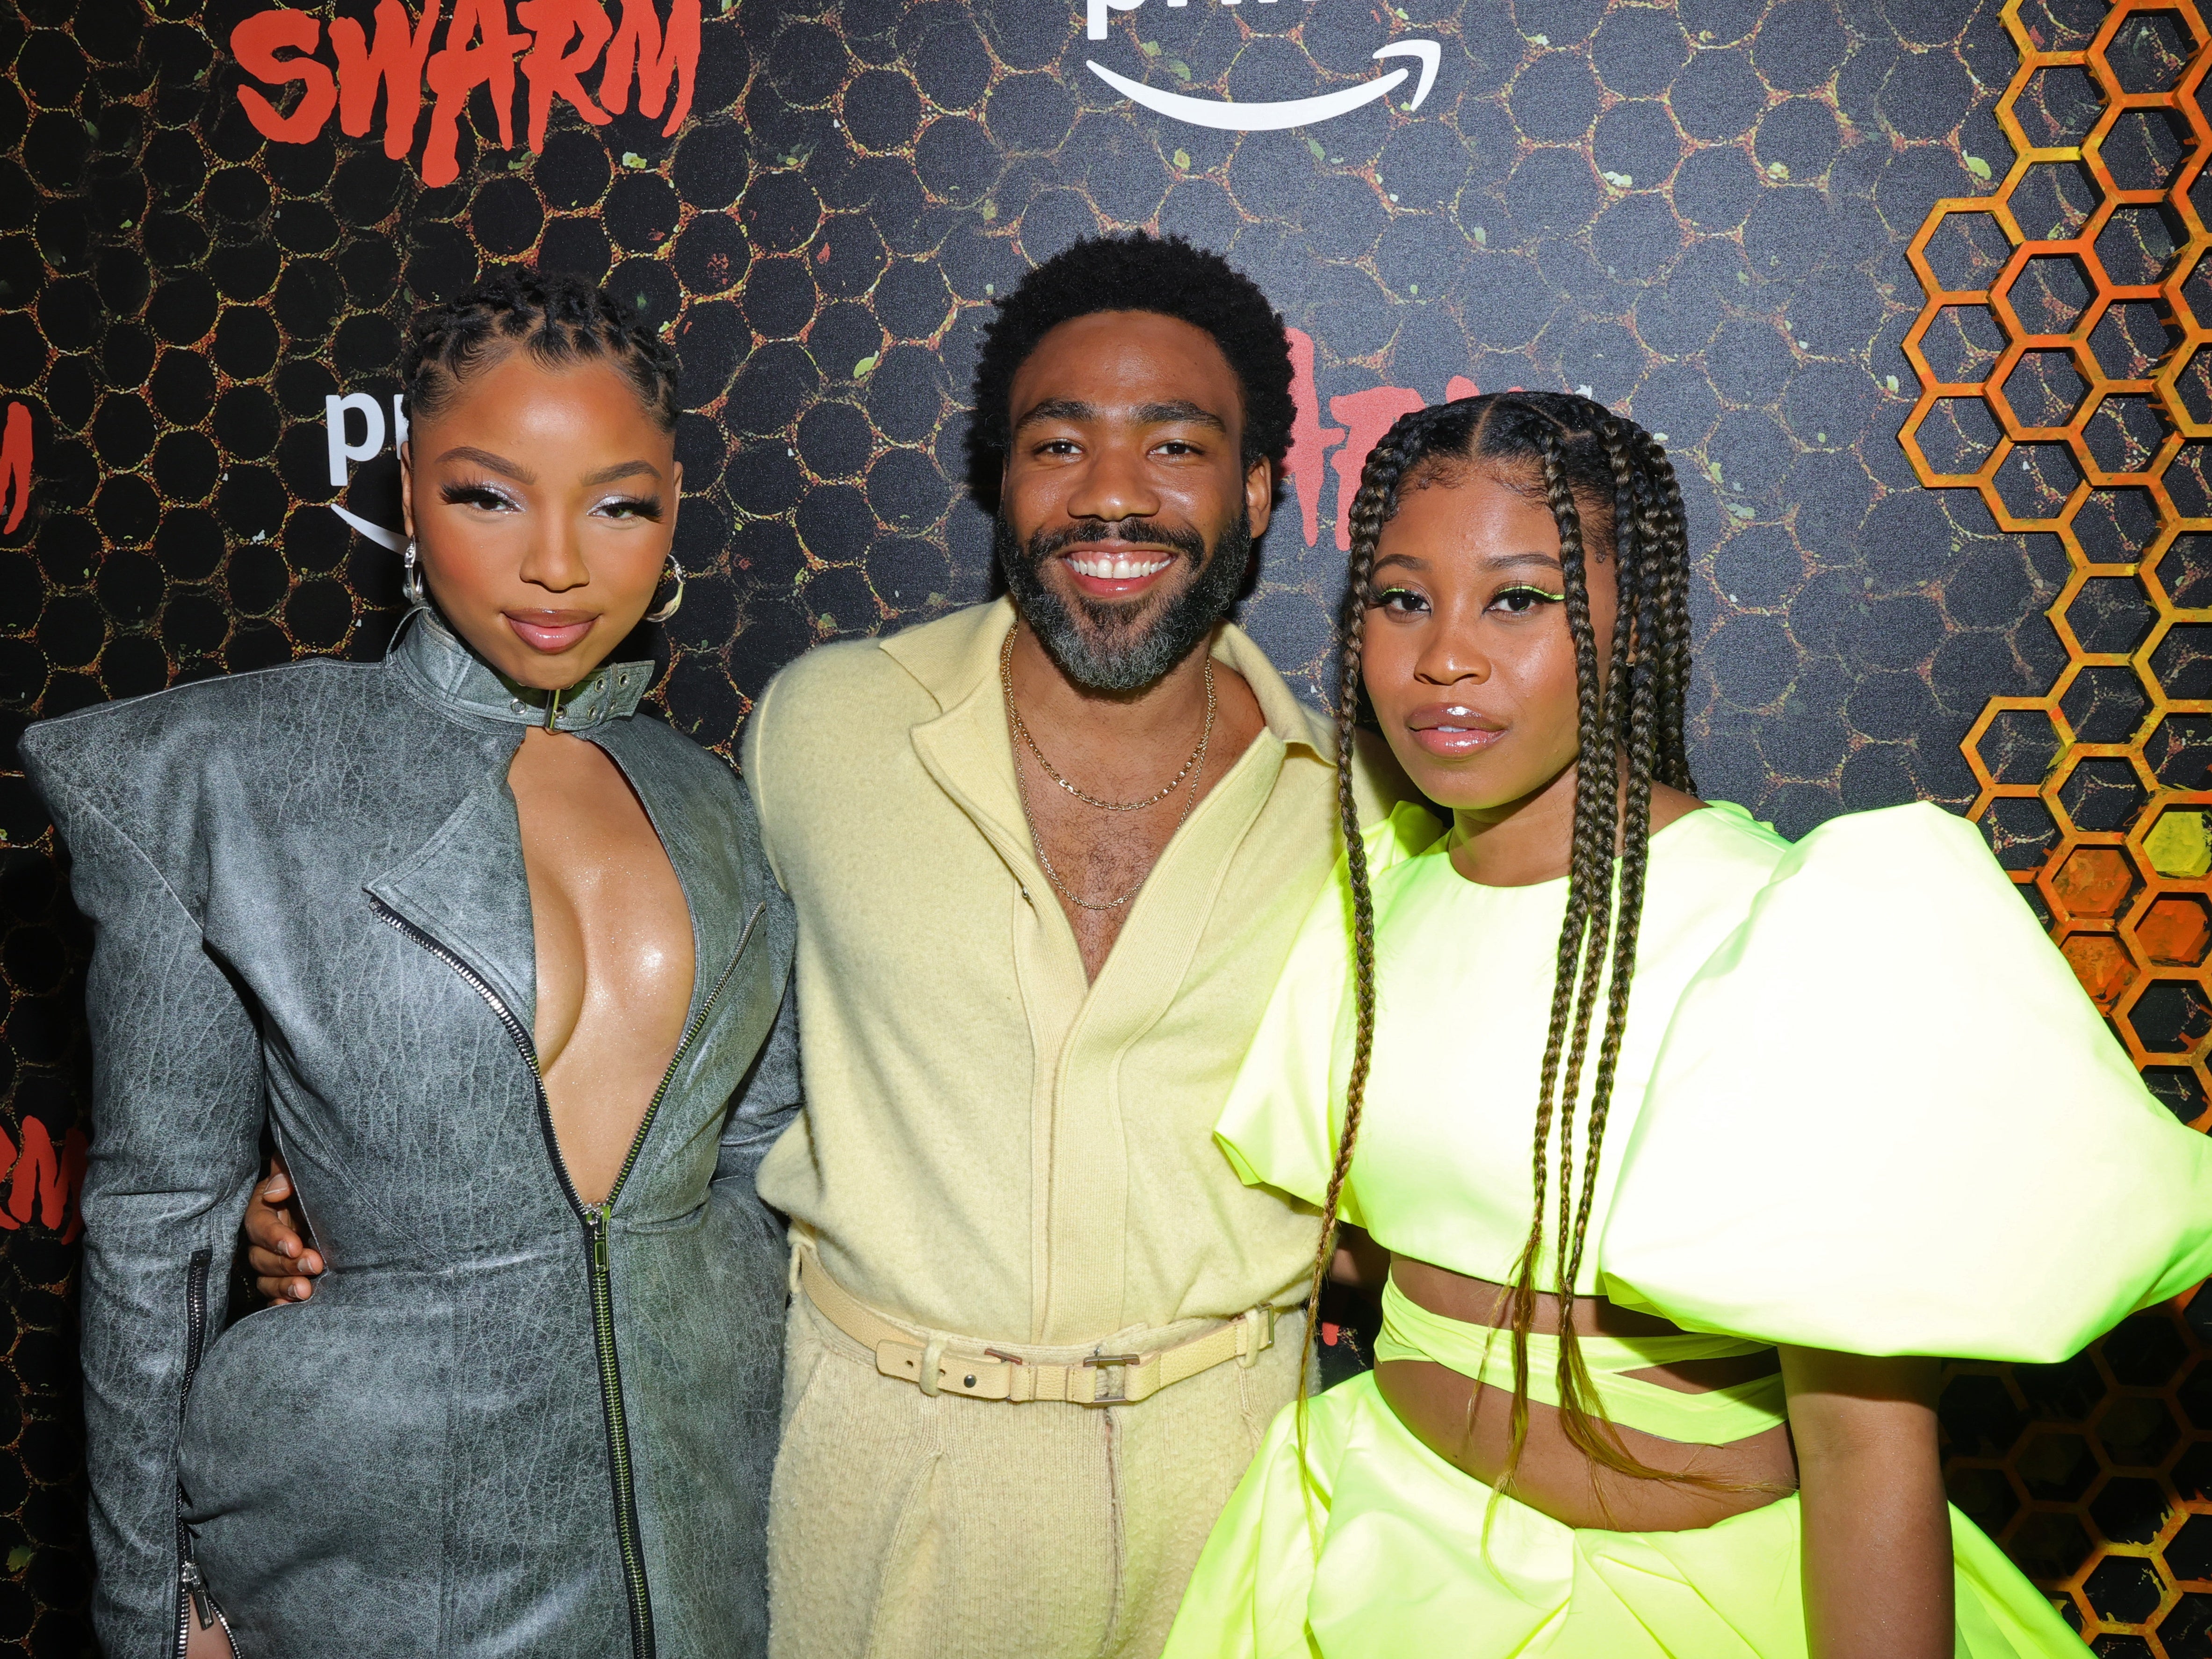 What The Stars Of Amazon's Swarm Wore For Their Premiere